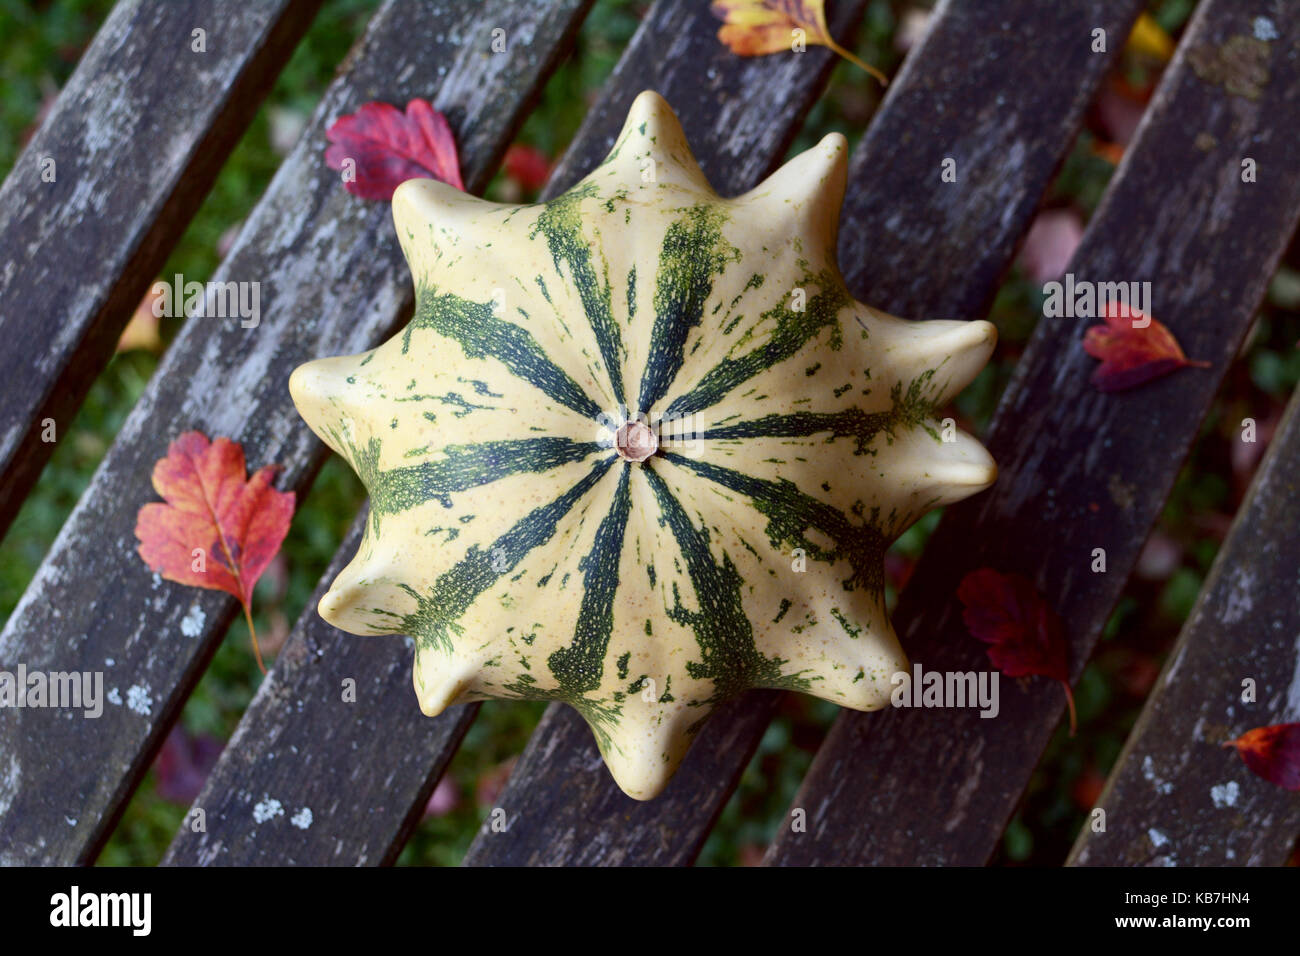 Crown of Thorns ornamental gourd - cream with green stripes - on a weather-beaten wooden bench with red autumn leaves Stock Photo